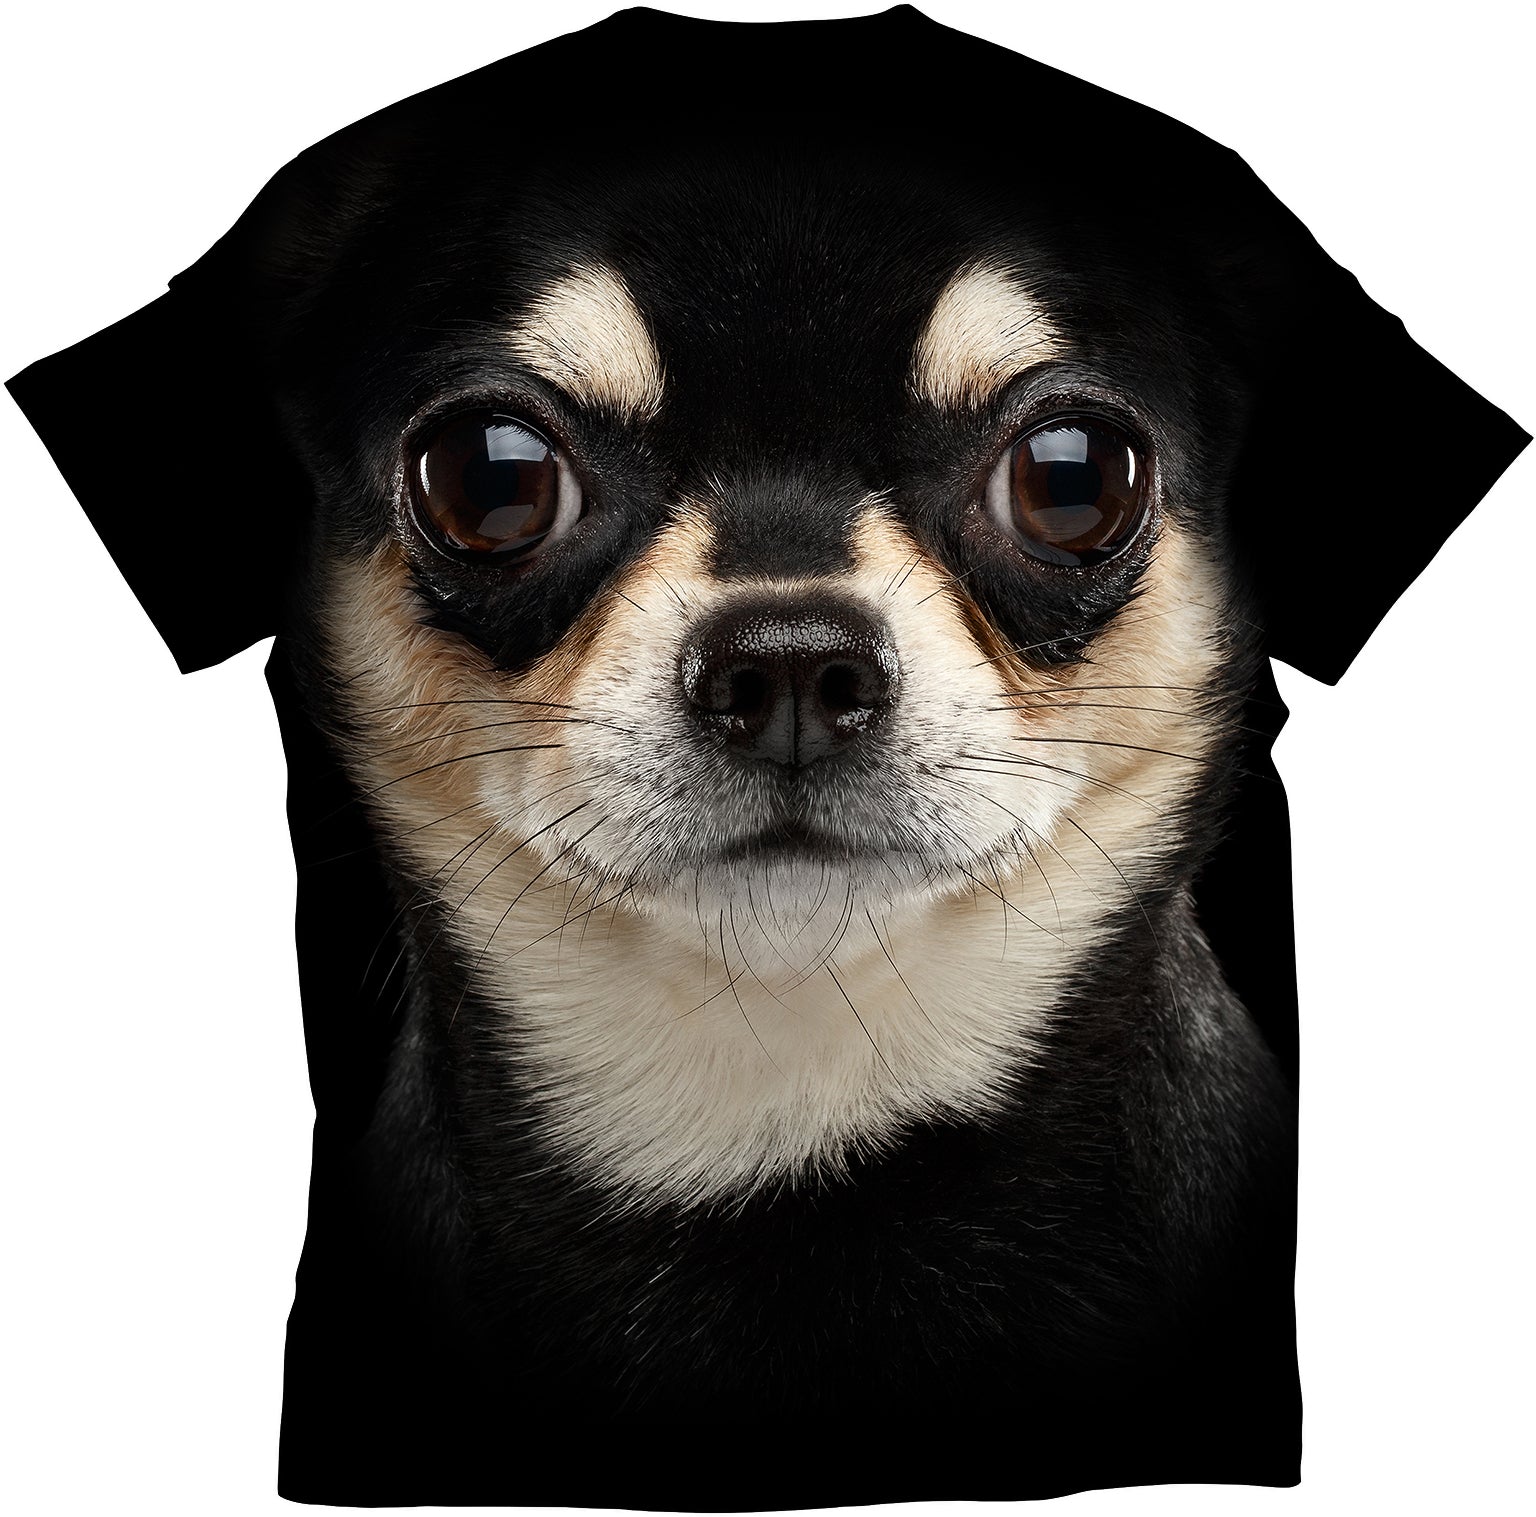 standout chihuahua t shirt all over print dog face t shirt redwolf souled store bewakoof osomwear dog show in india the kennel club of india dog t shirts for humans funny dog shirts dog graphic t shirts dogteeshop dog lover t shirt dog clothes online dog print t shirts india pet lover t shirt 3d animal print t shirts pet supply the mountain t shirt chihuahua t shirt